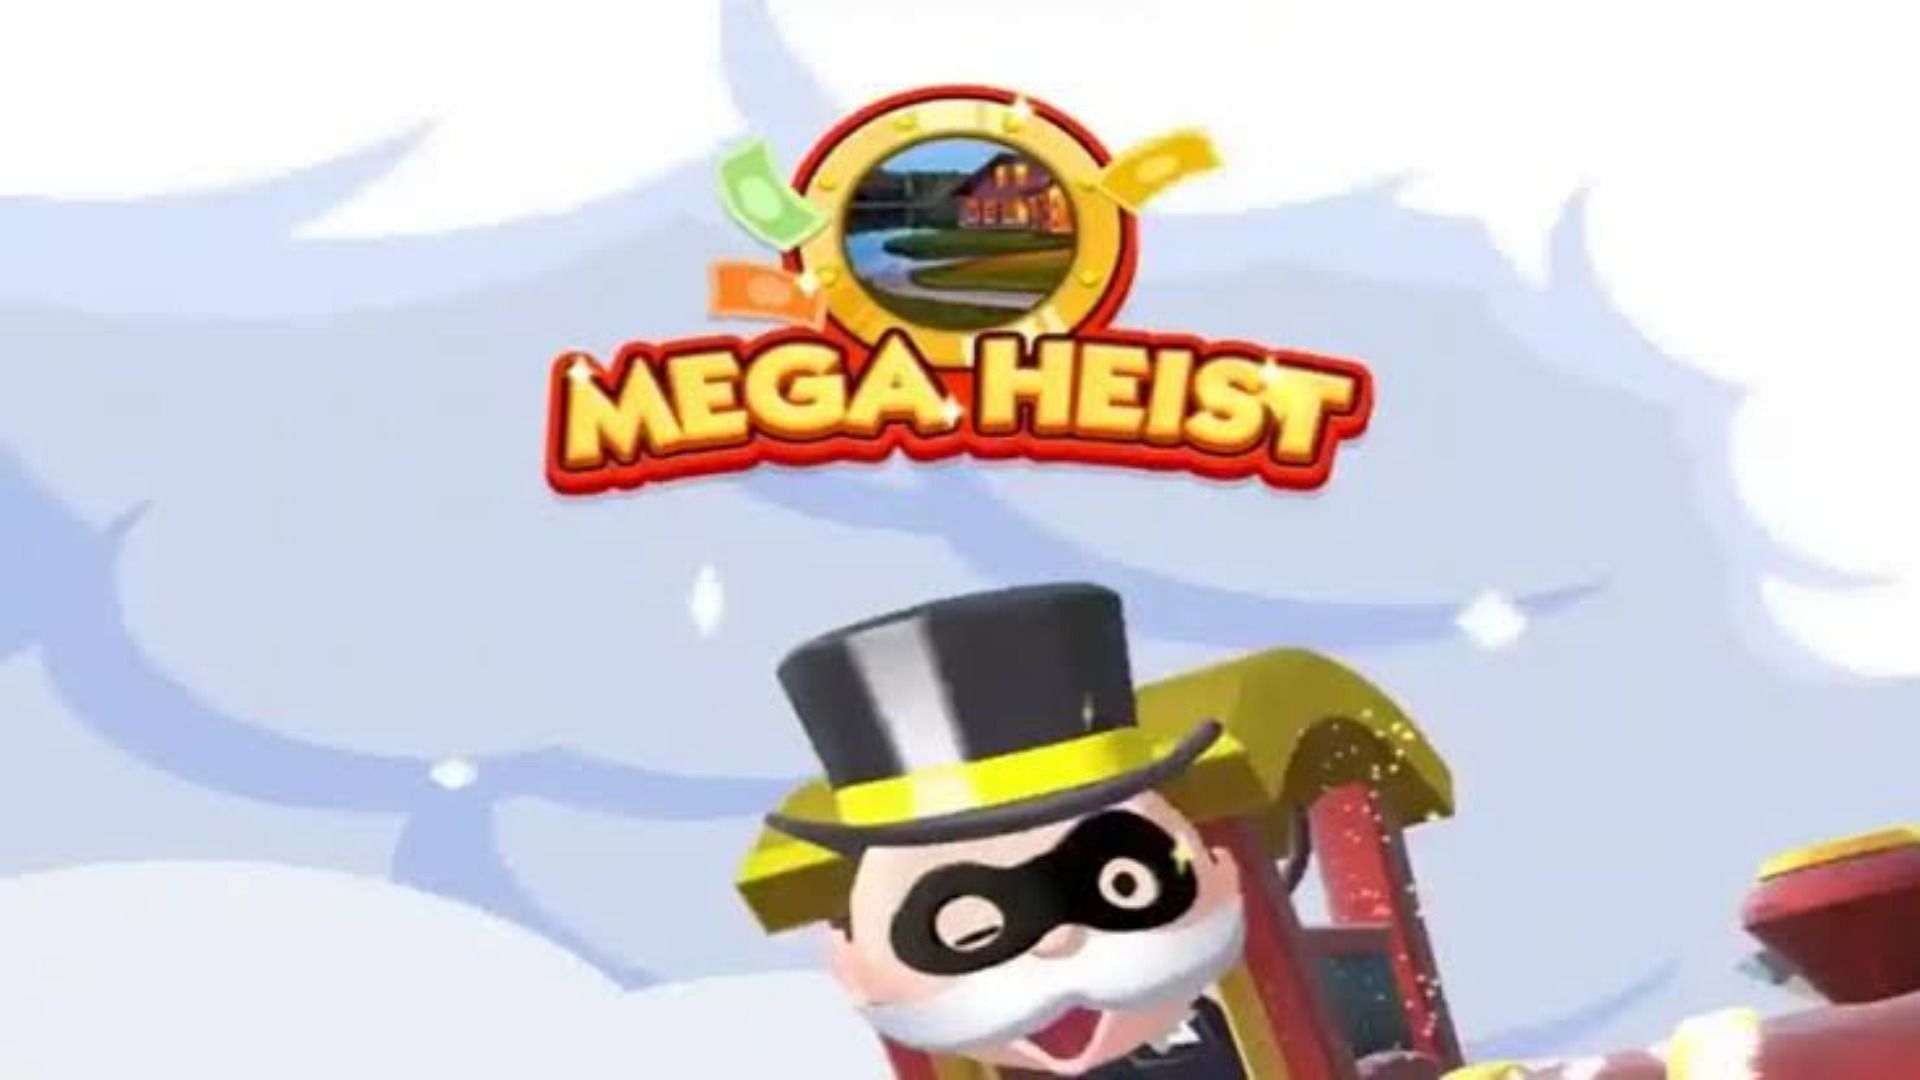 Mega Heist is among the first few events scheduled for today (Image via Scopely)